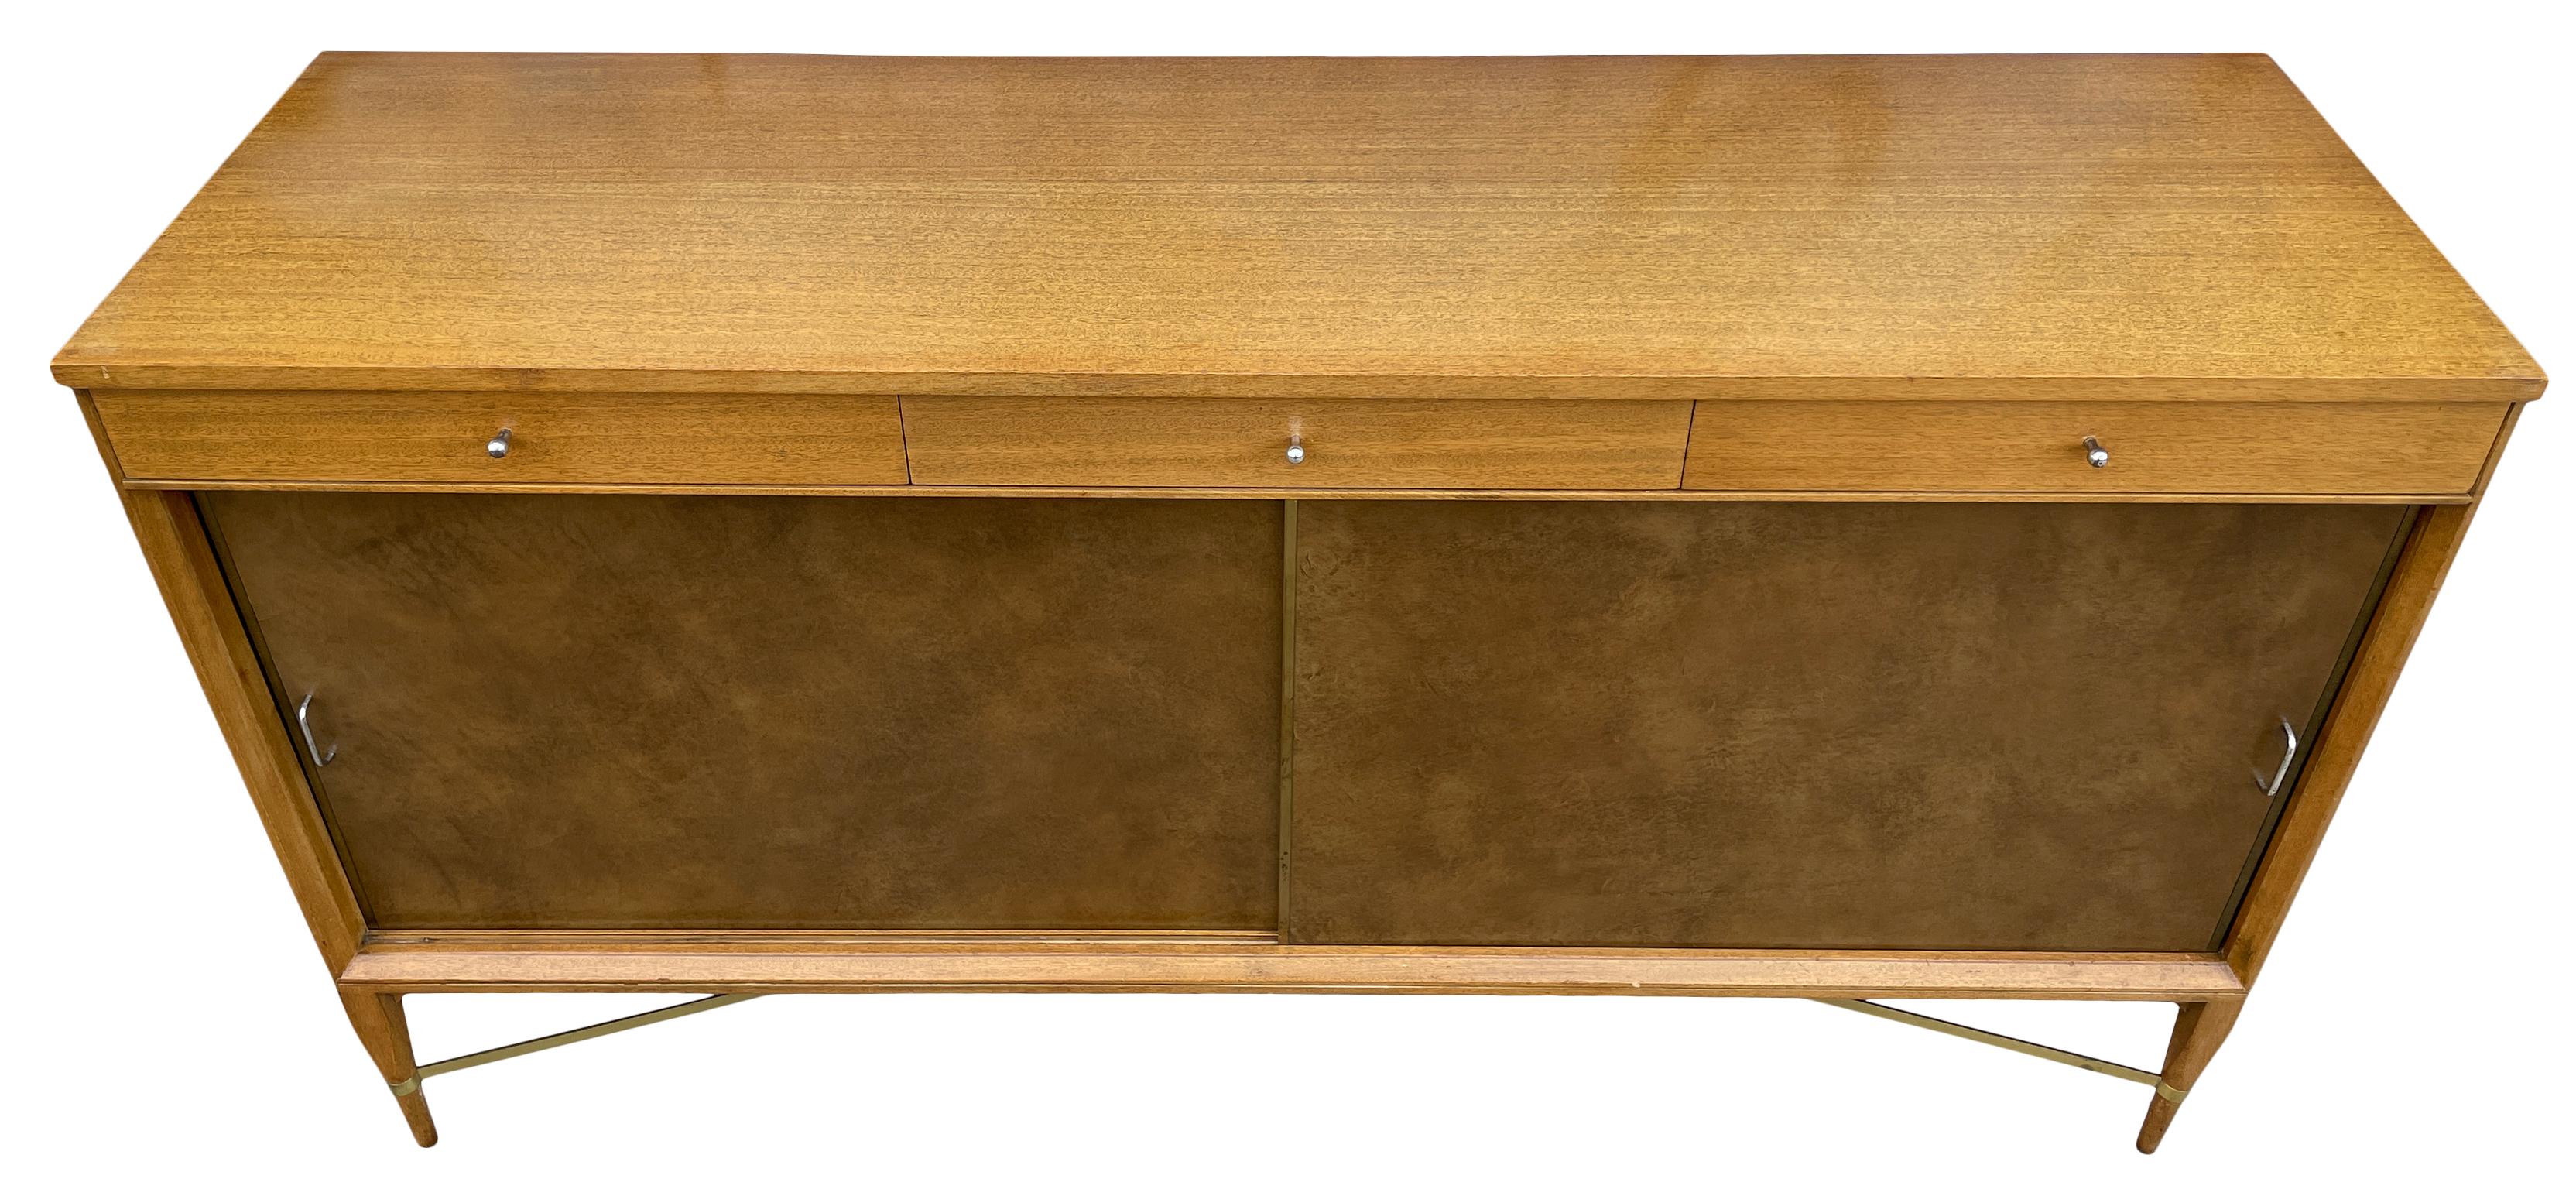 An exceptional Mid-Century Modern brown leather sliding doors sideboard/credenza with 3 top drawers. Behind the sliding doors are 2 adjustable shelves in a dark brown finish. The outside of the credenza is a lighter blonde finish. Designed By Paul